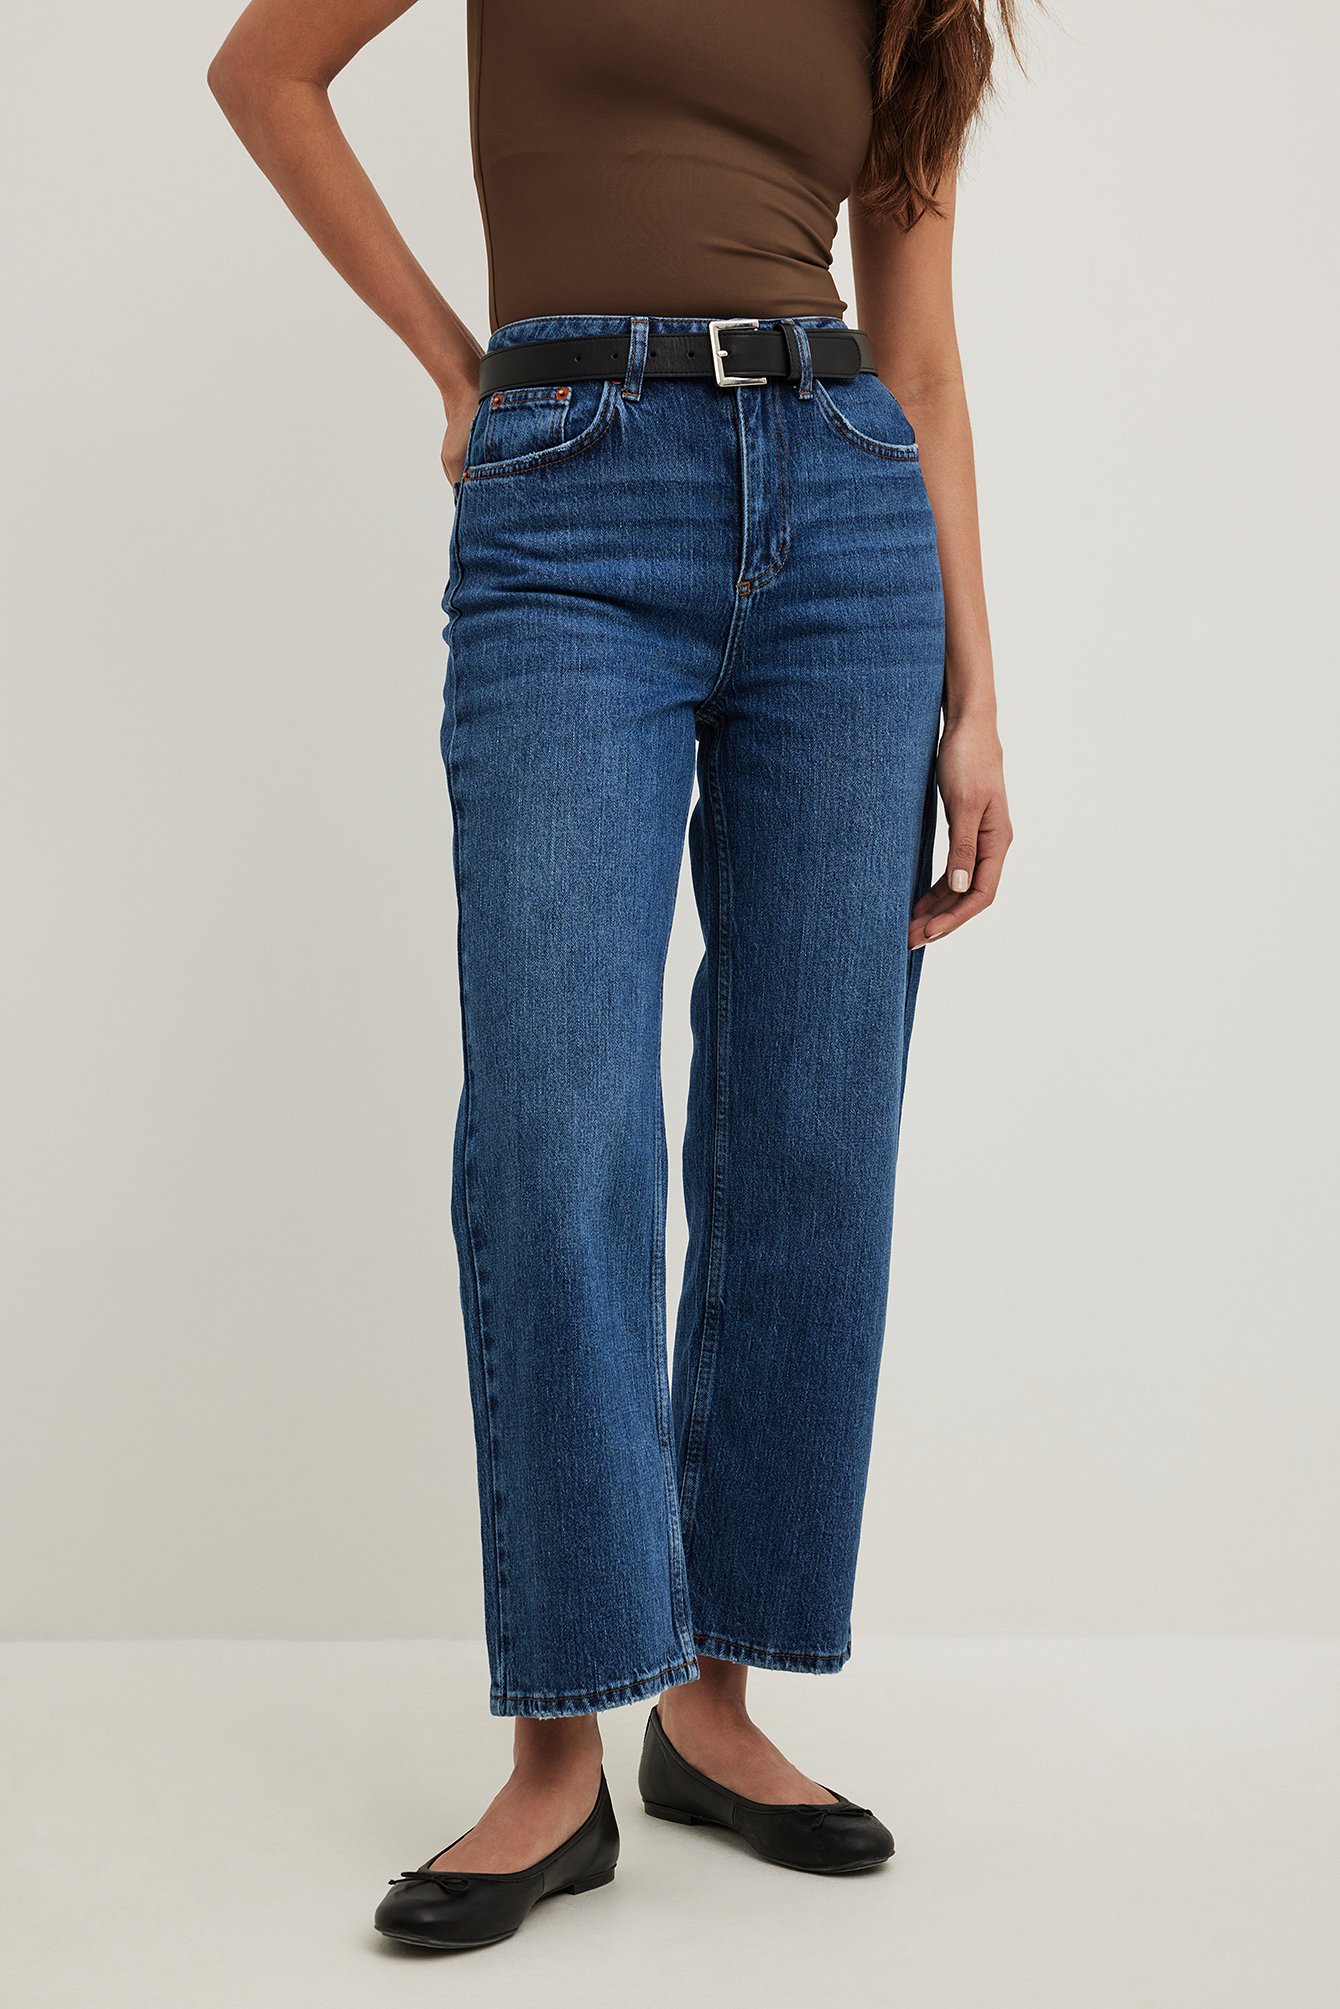 Cropped & Ankle Jeans, Women's Jeans